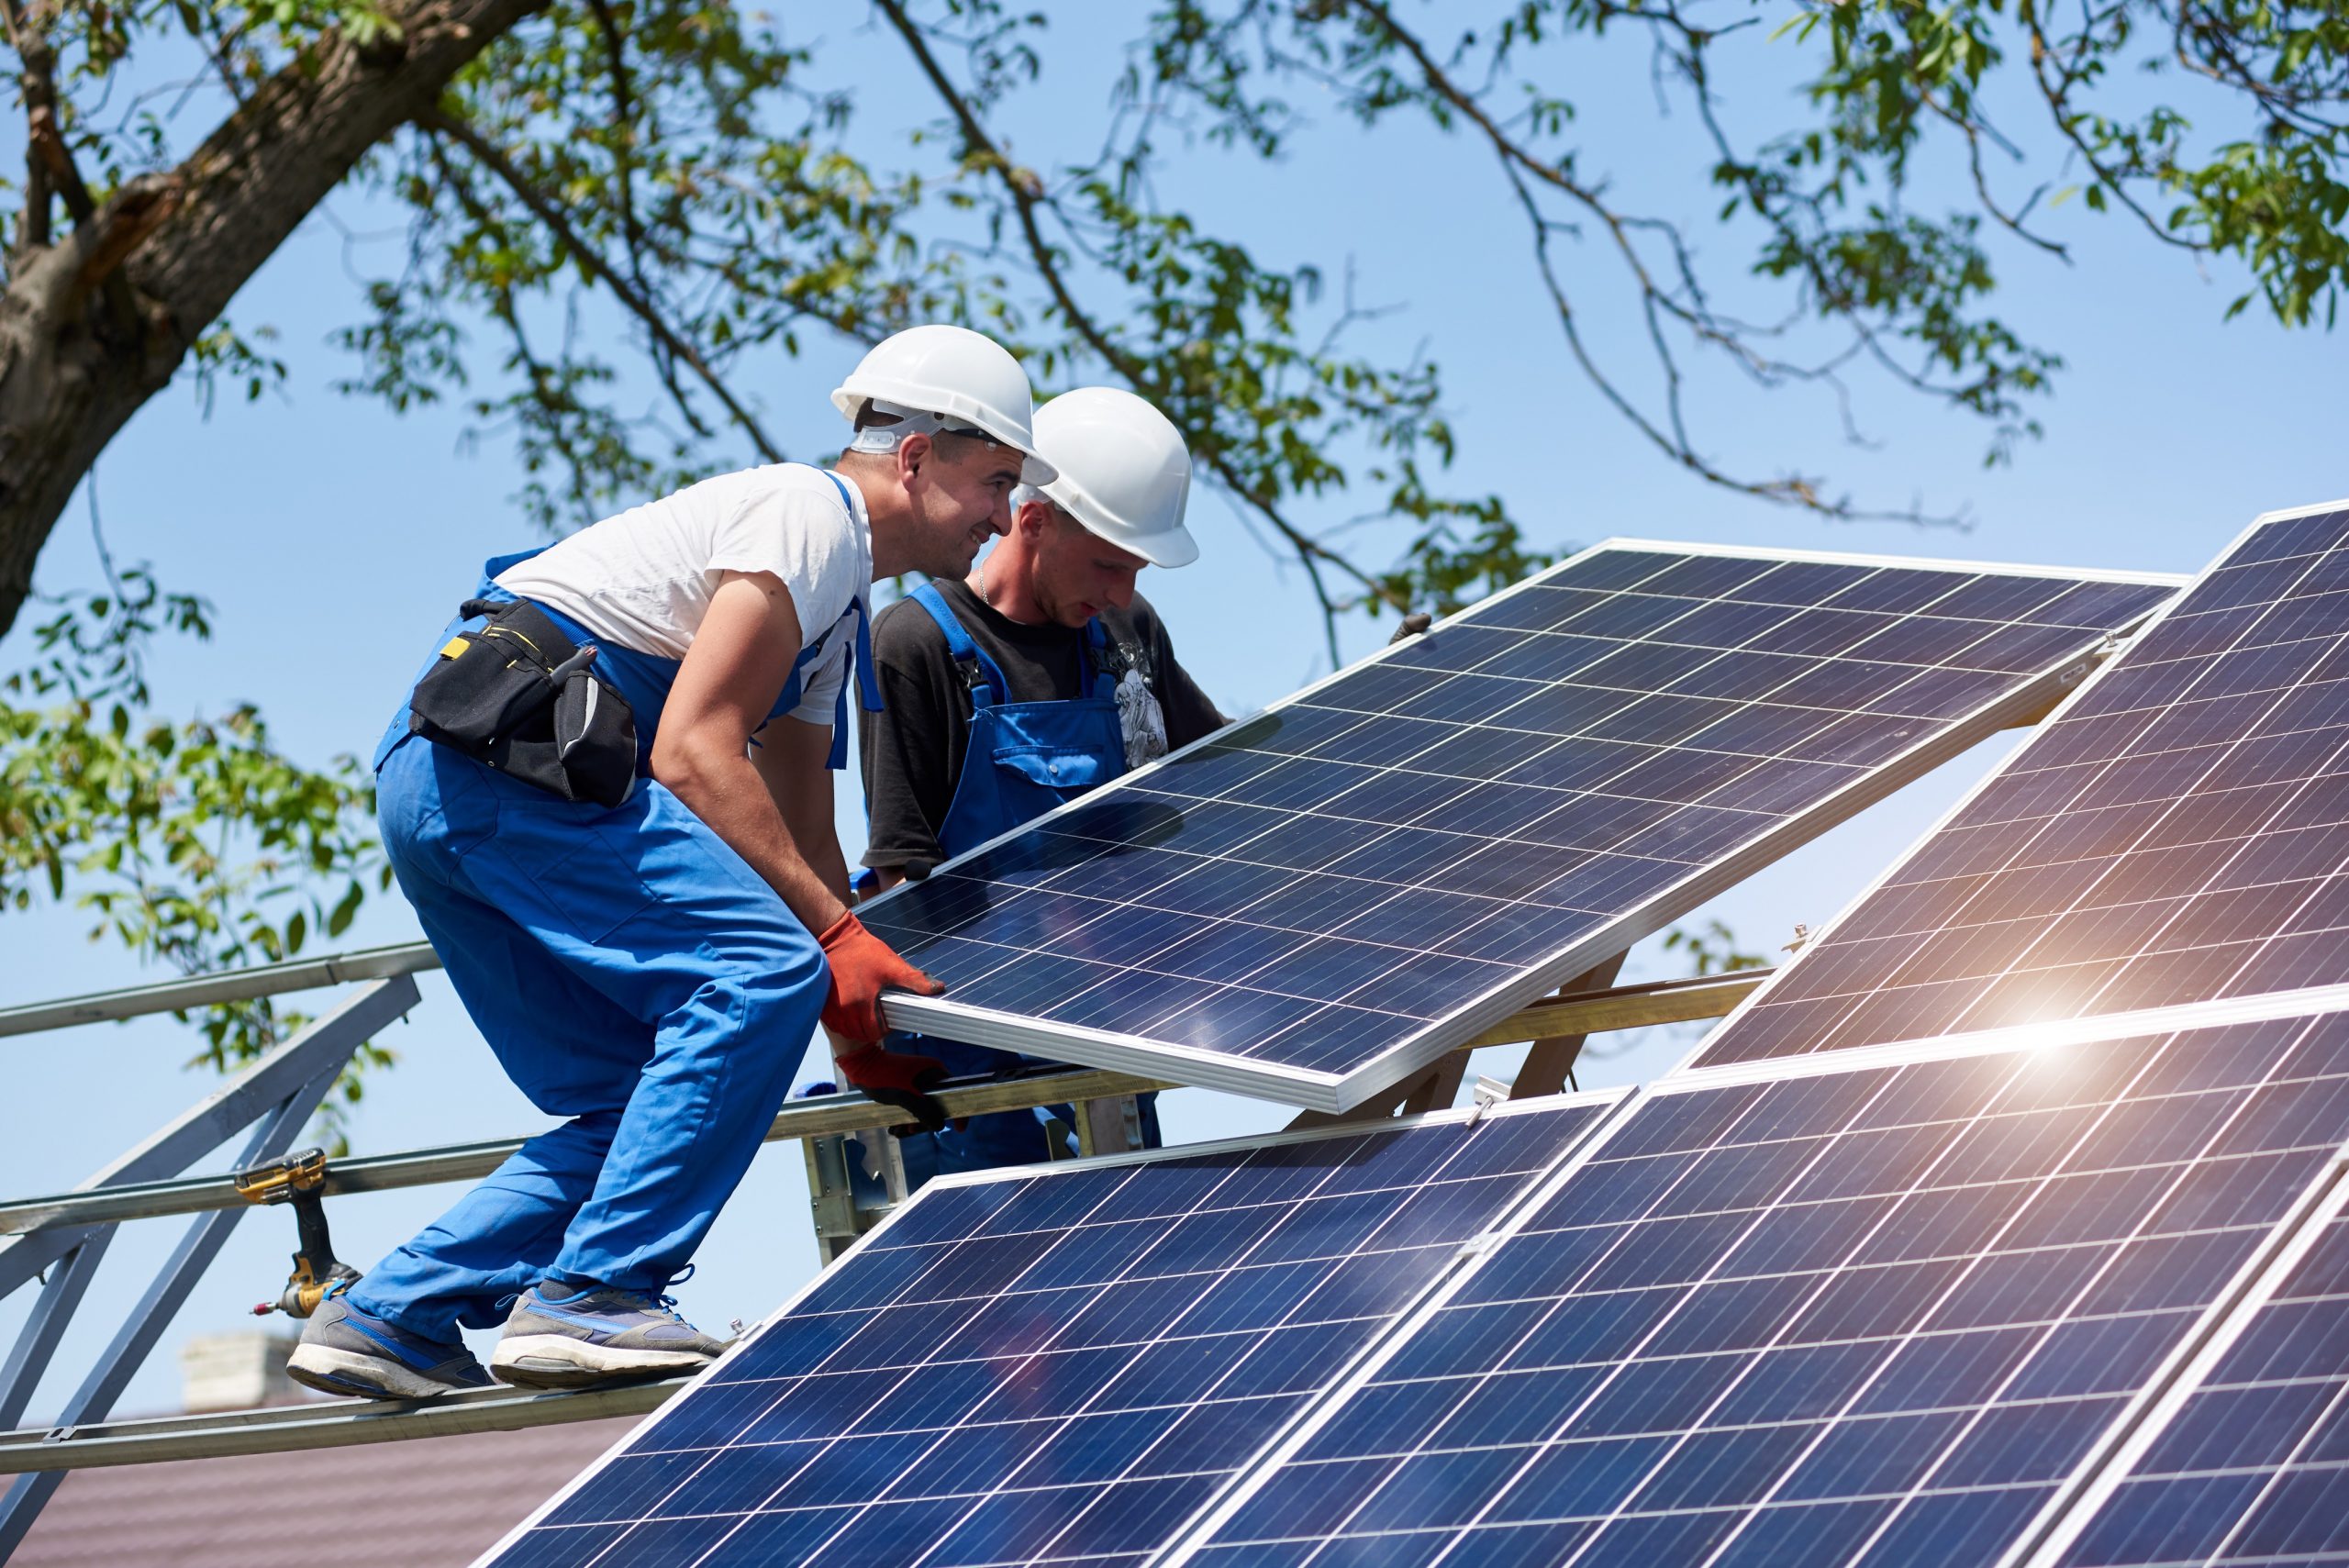 are-solar-panels-worth-it-6-things-to-consider-home-senator